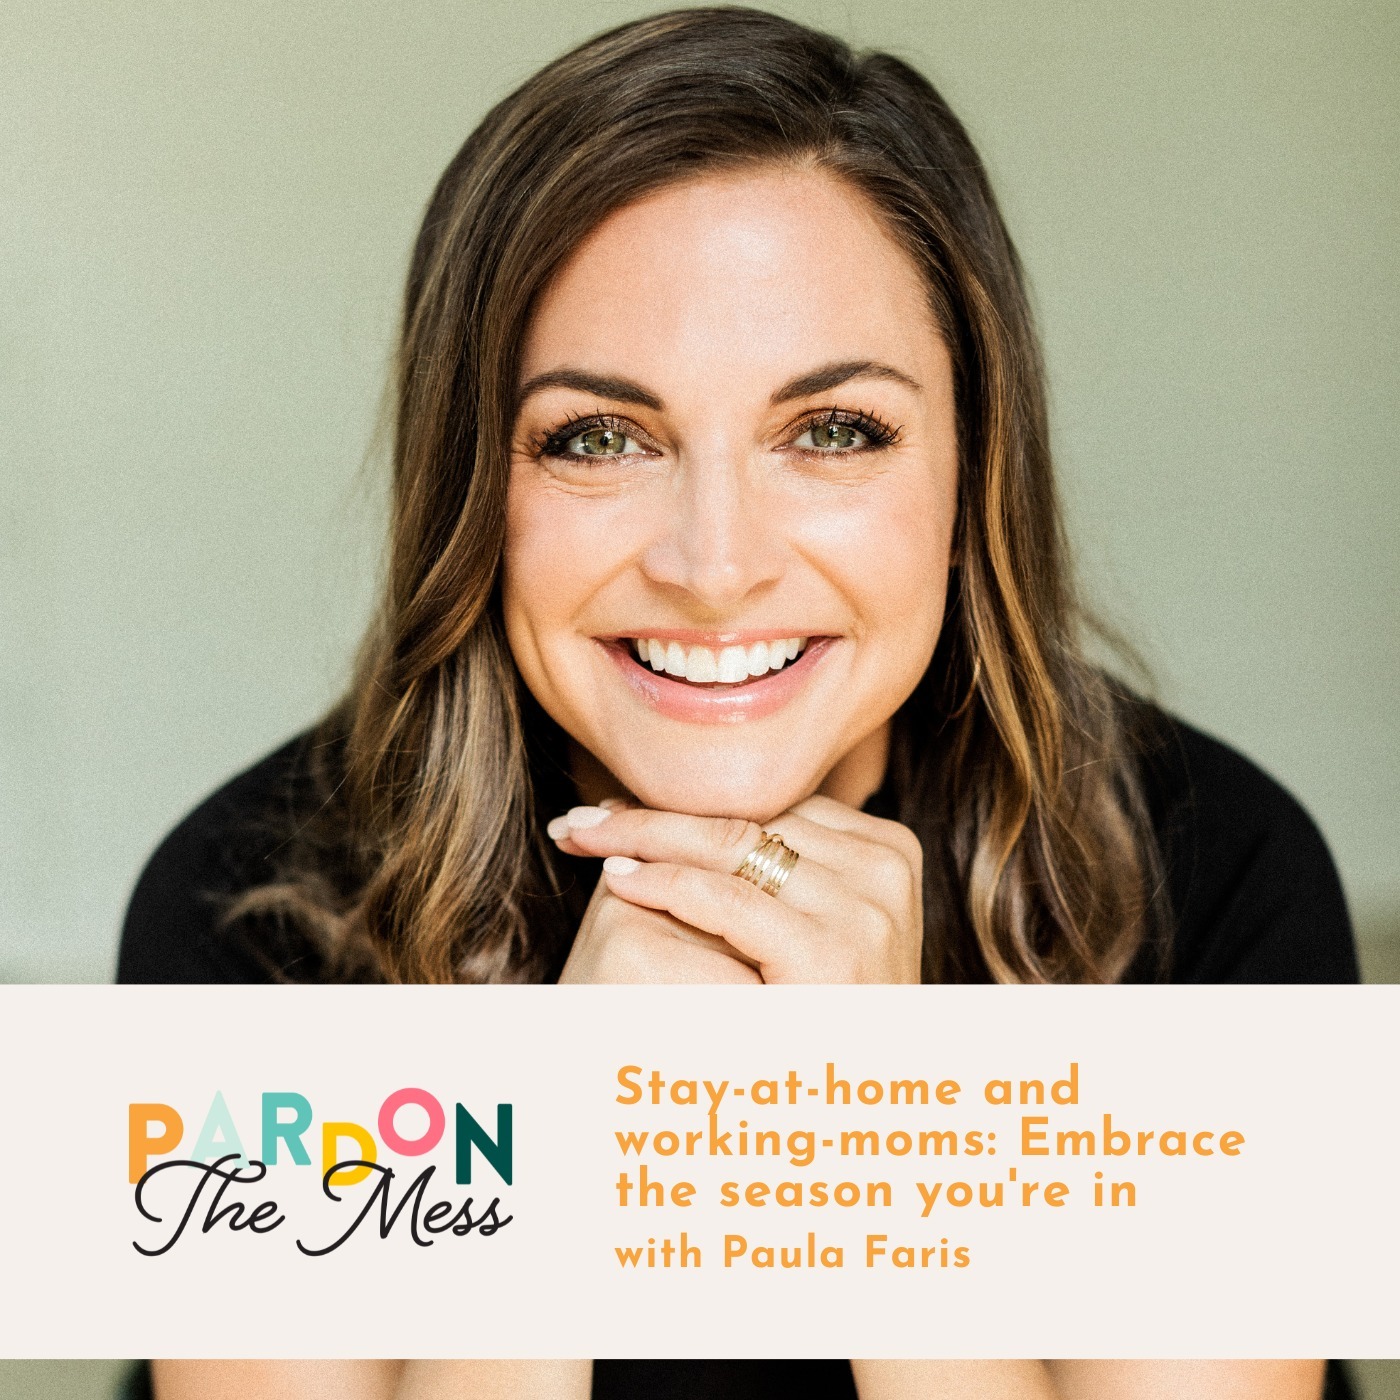 Let’s end the mommy wars - working vs stay-at-home? with Paula Faris